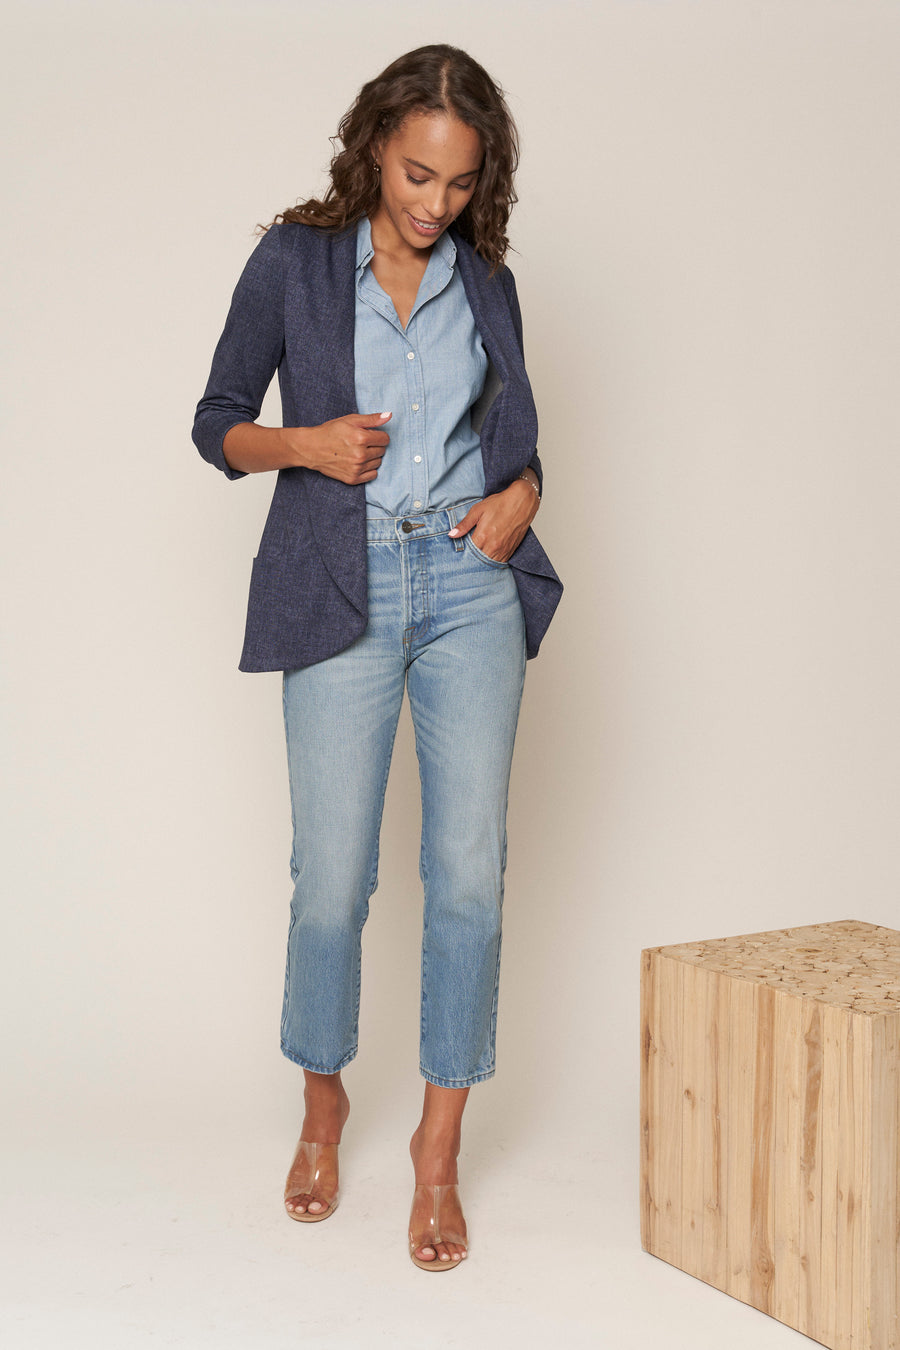 No Srcipt image - Images of 2 of 7 Classic Melanie Shawl Simple Staple Taupe Neutral Color Workwear Office Wear Women’s Outerwear Blazer Jacket Everyday Shawl Front Pockets Best Seller Customer Favorite Casual Style Everyday Jacket Indigo Denim Fabric Structured Material